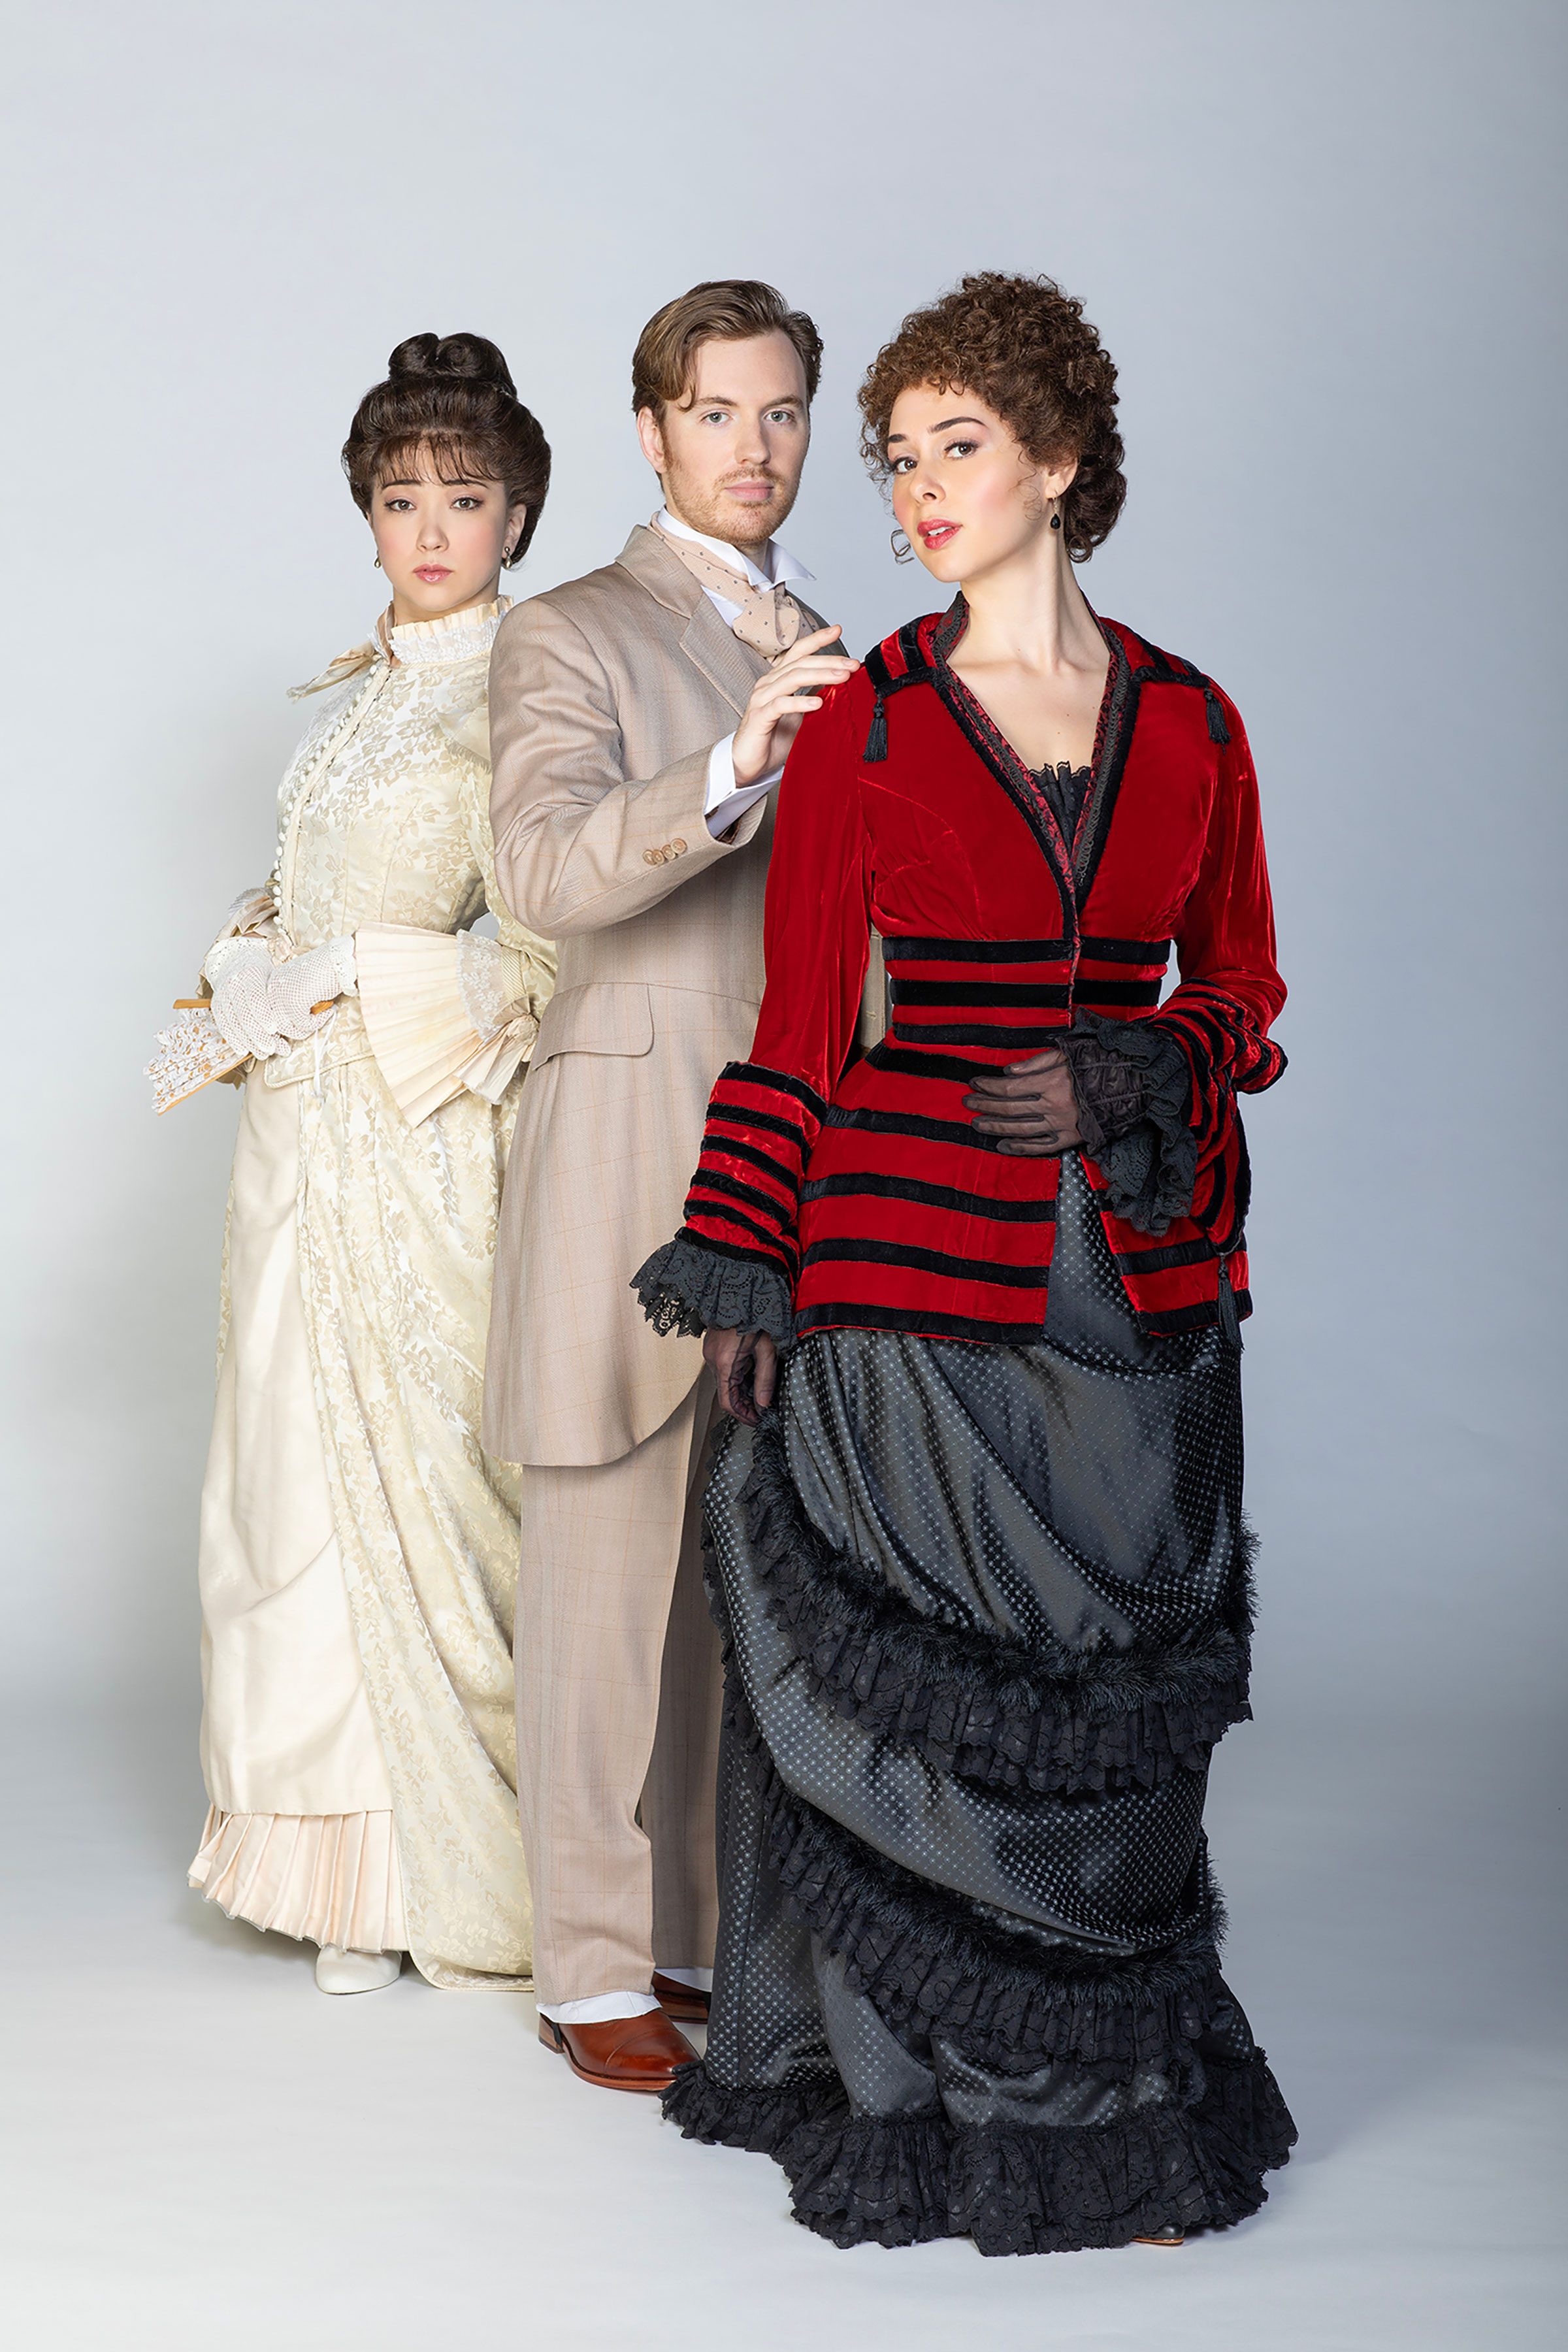 (from left) Delphi Borich as May, Callum Adams as Newland Archer, and Shereen Ahmed as Ellen in The Age of Innocence. Photo by Jim Cox.